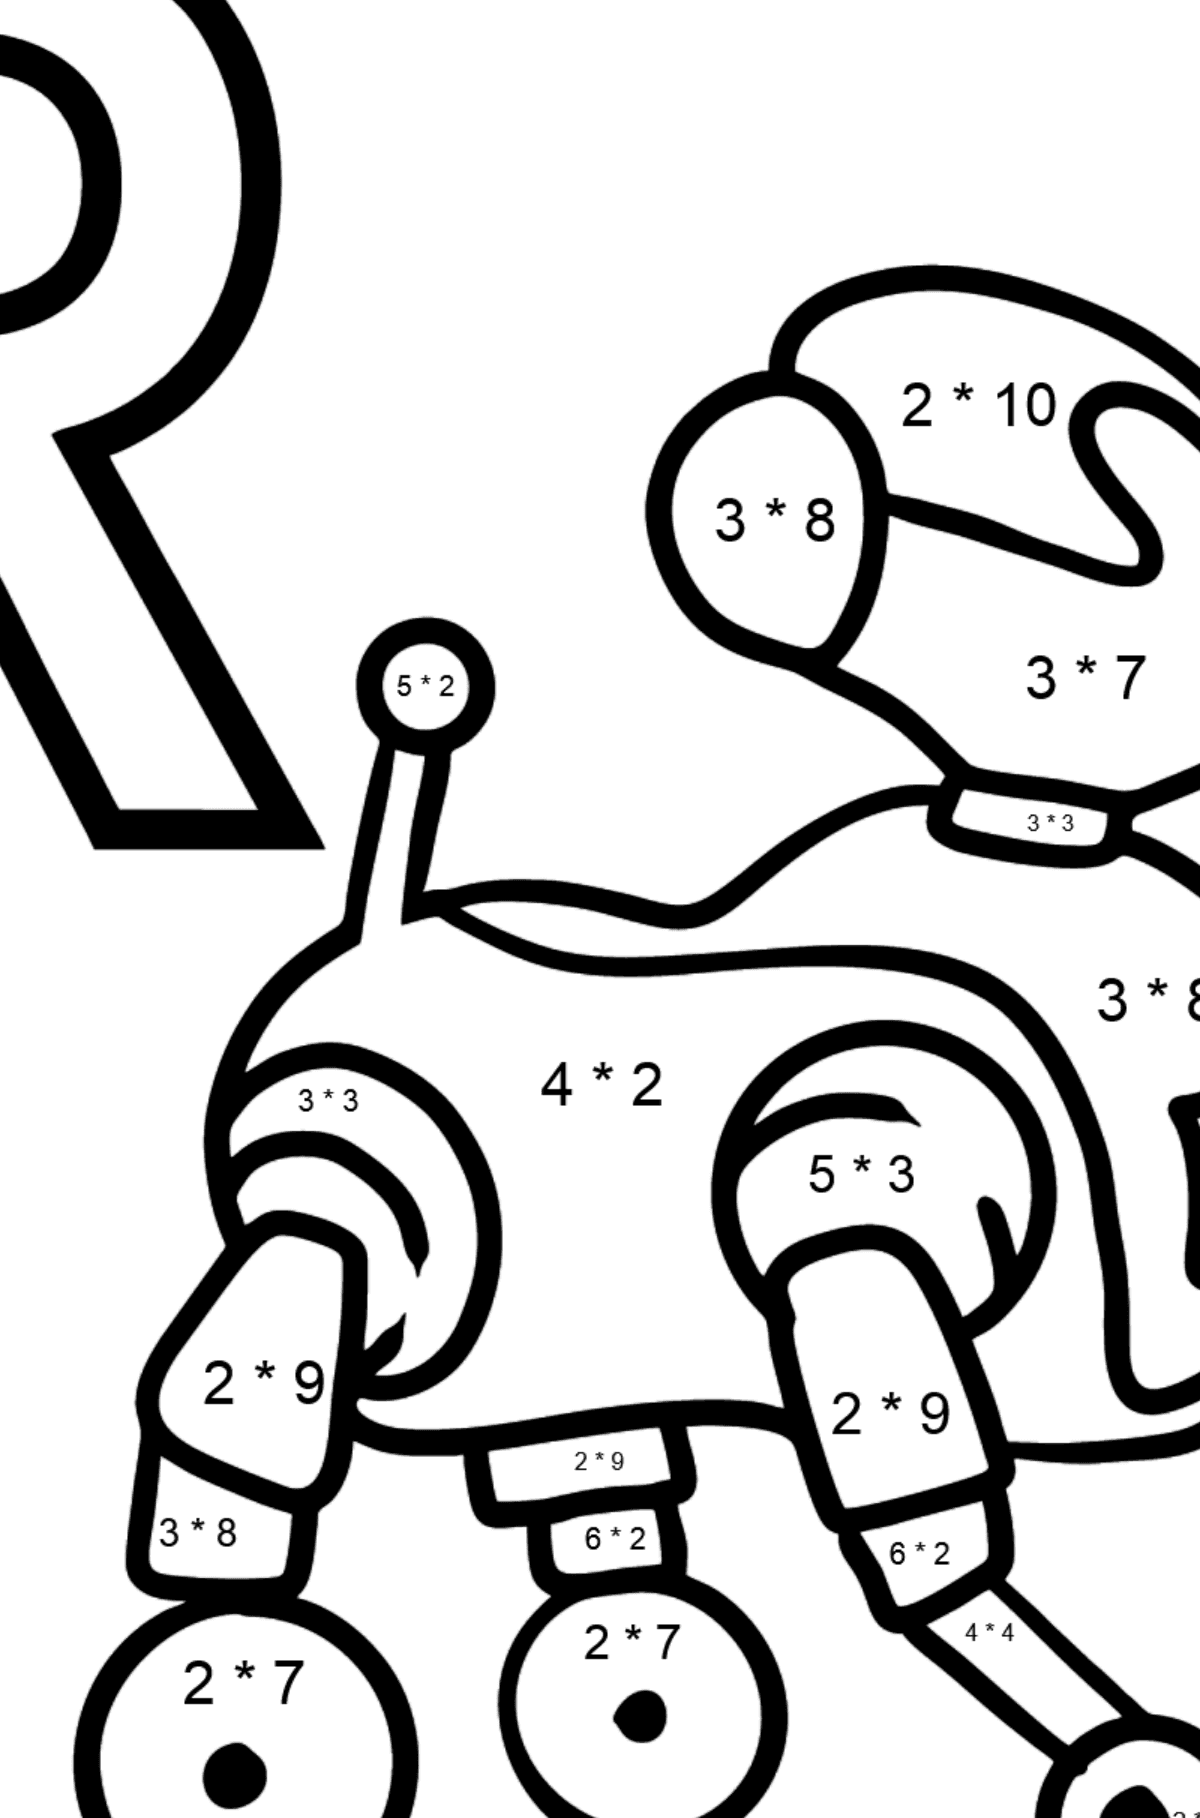 Spanish Letter R coloring pages - ROBOT - Math Coloring - Multiplication for Kids